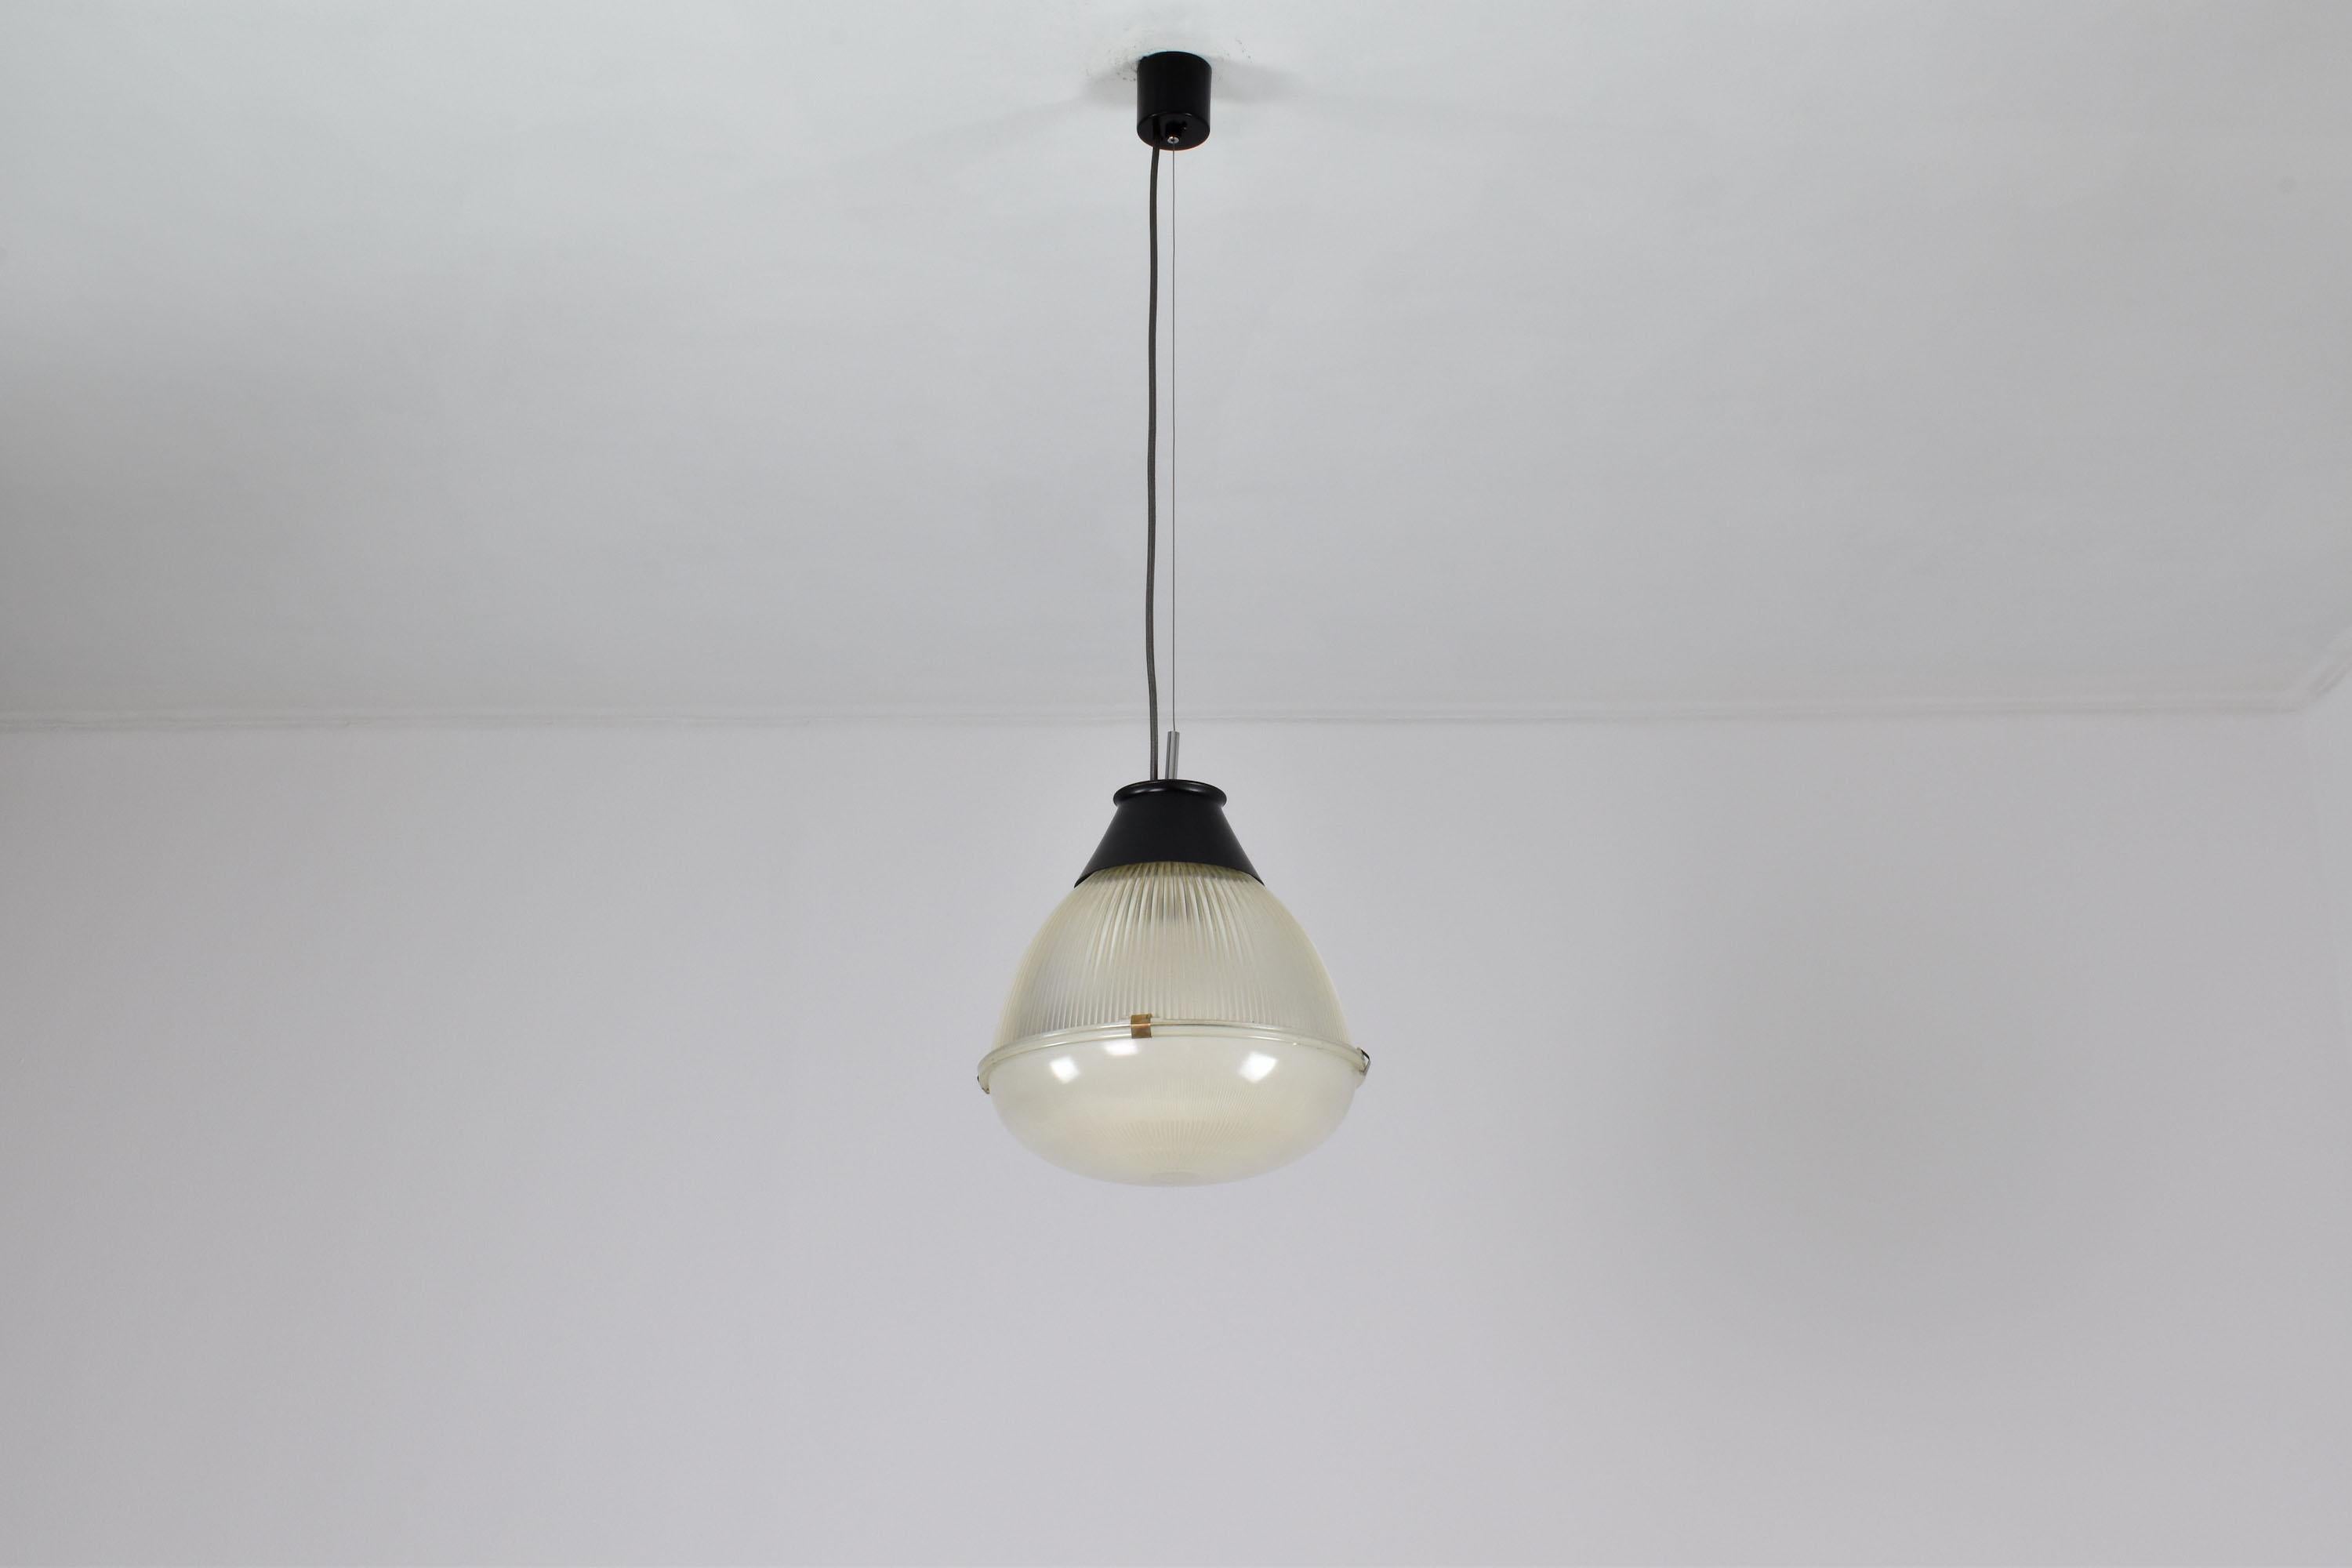 A beautiful Italian collectible pendant light designed by the notable Ignazio Gardella for Azucena in the 1960s. This modern design is highlighted by its industrial-inspired black aluminum structure and two glass shades with brass clips. 
Italy.